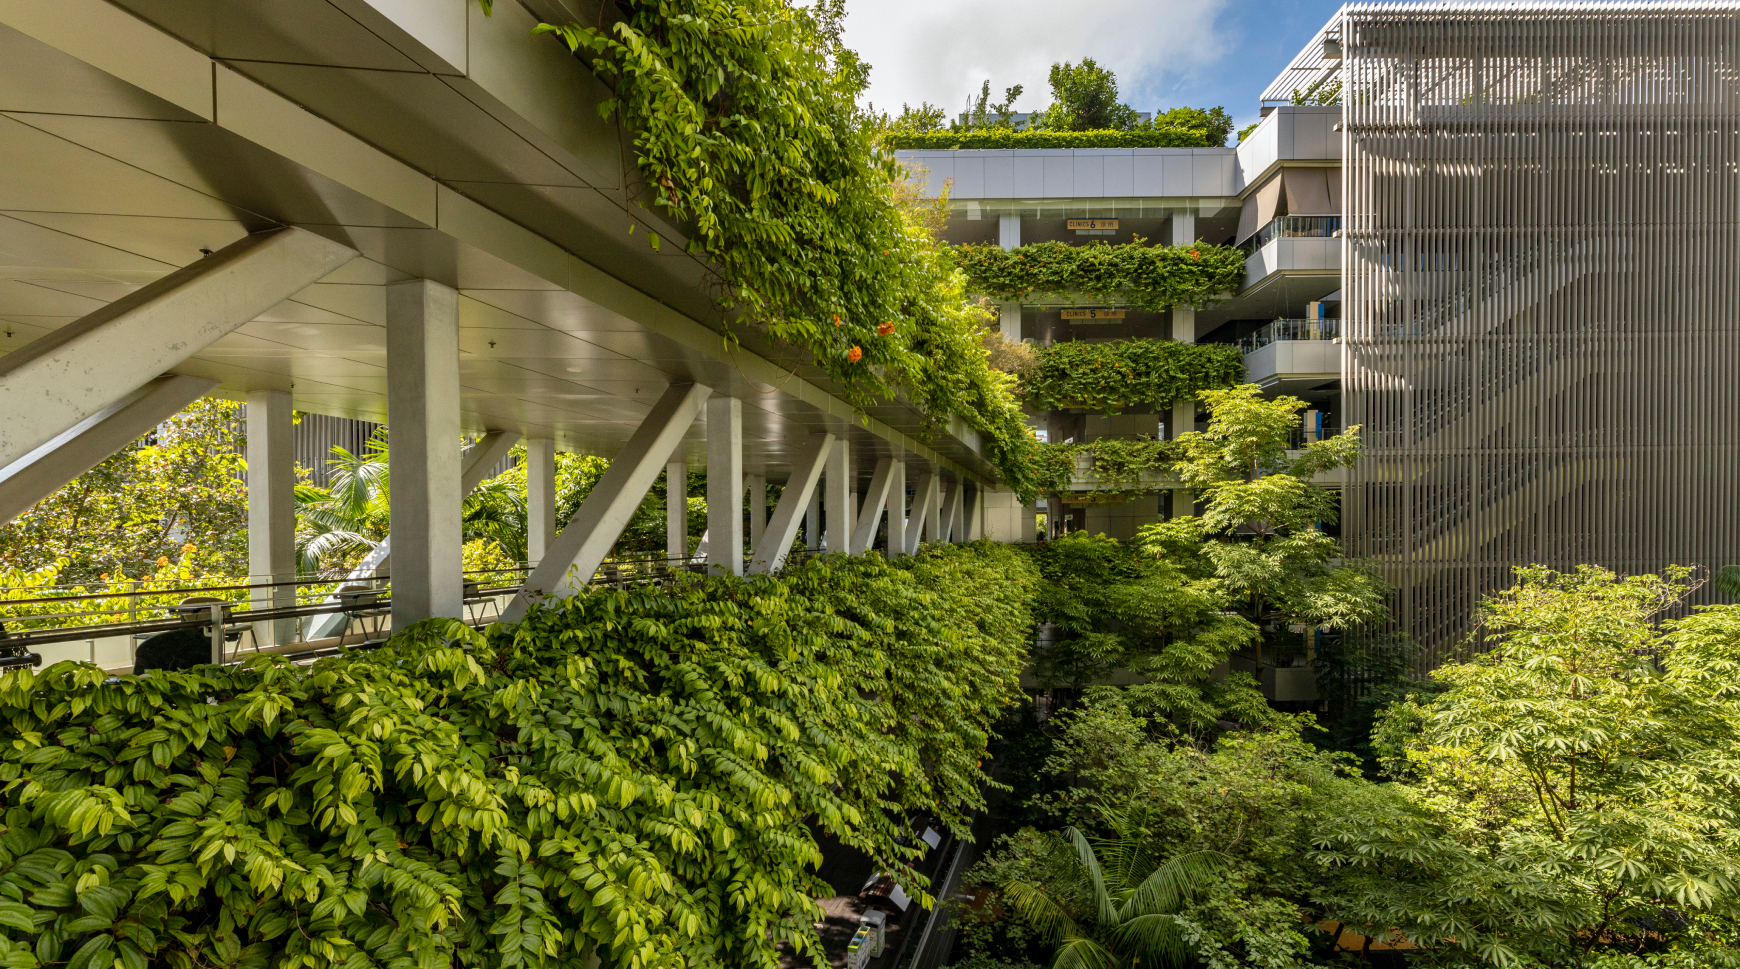 Verdant Greenery from the rooftop to the basement makes Khoo Teck Puat Hospital a hospital-in-a-garden